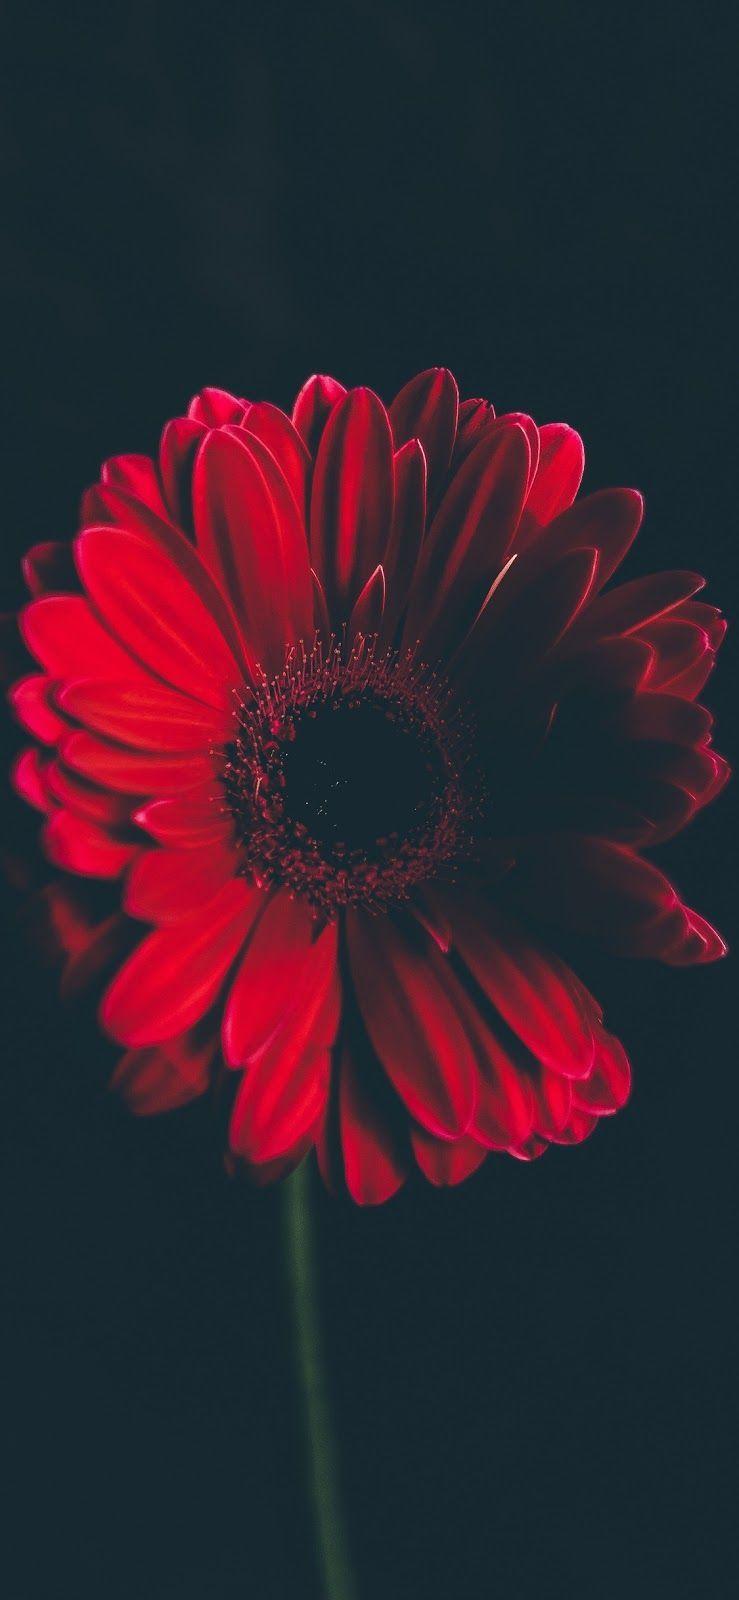 Red Flower iPhone Wallpapers - Top Free Red Flower iPhone ...